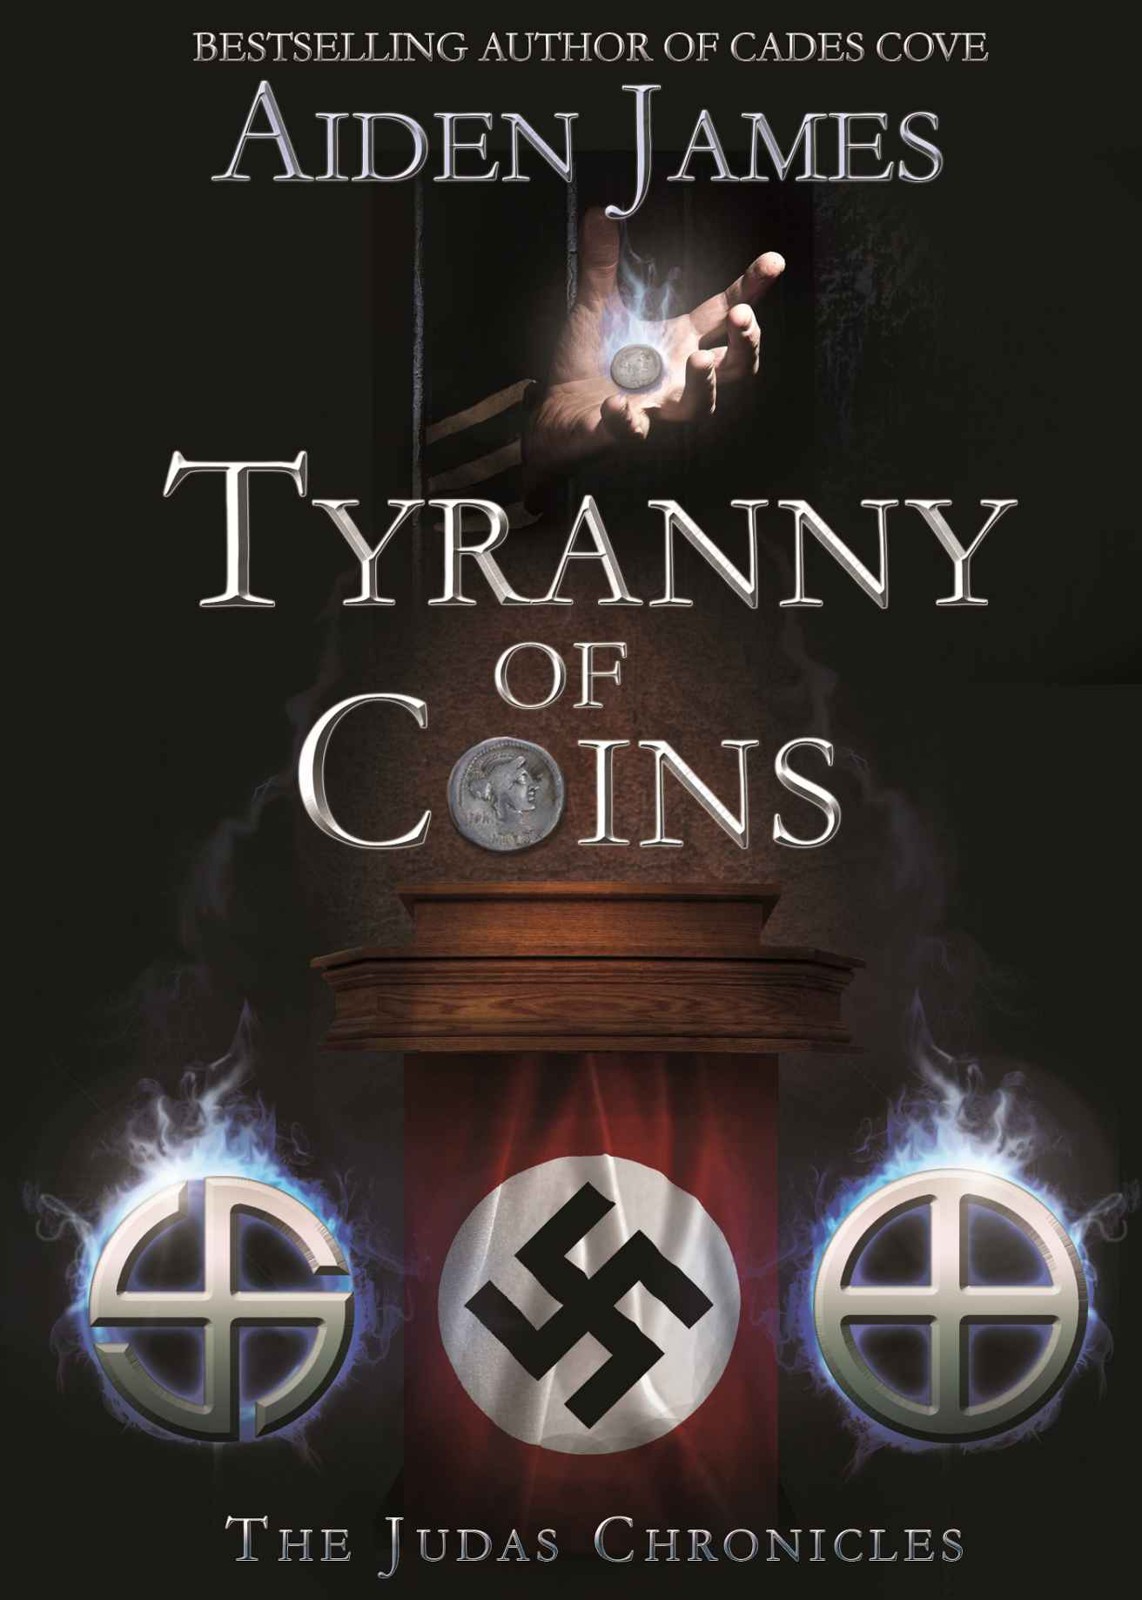 Tyranny of Coins (The Judas Chronicles) (Volume 5) Paperback by Aiden James